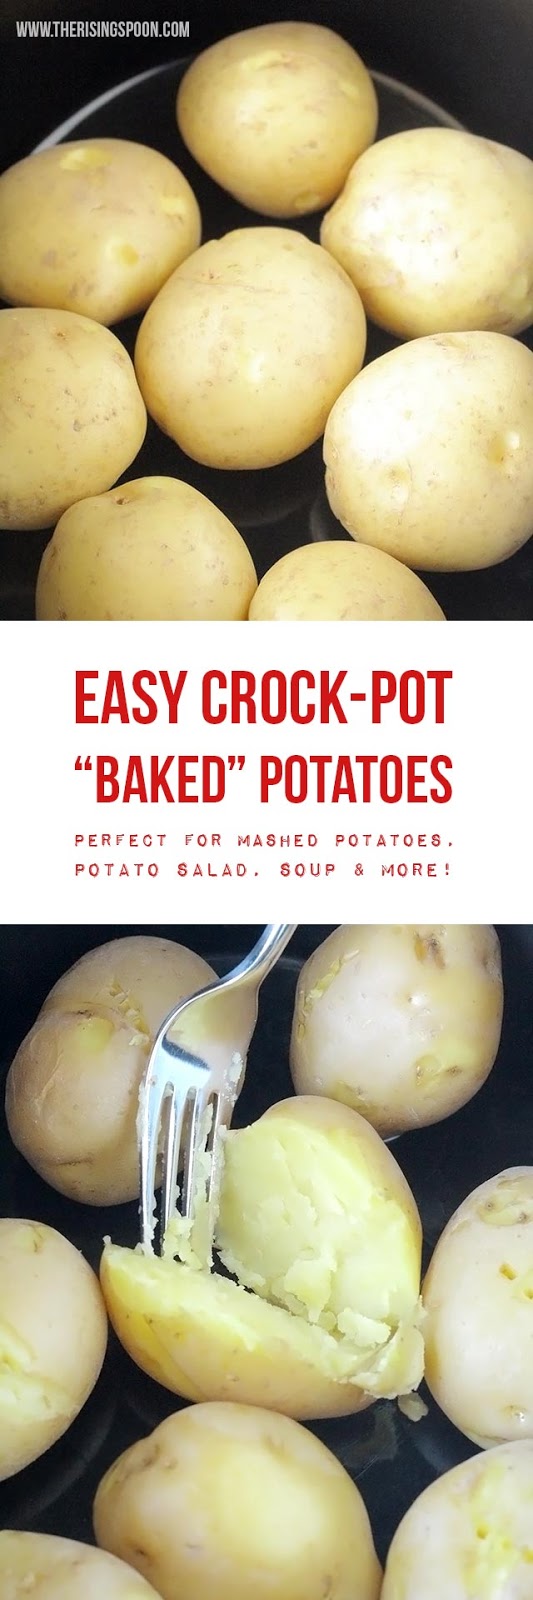 Learn this easy method for fixing "baked" potatoes in your slow cooker so you don't need to turn on the oven! Even better, use the leftovers for quick & simple recipes like potato salad, soup, and breakfast potatoes.